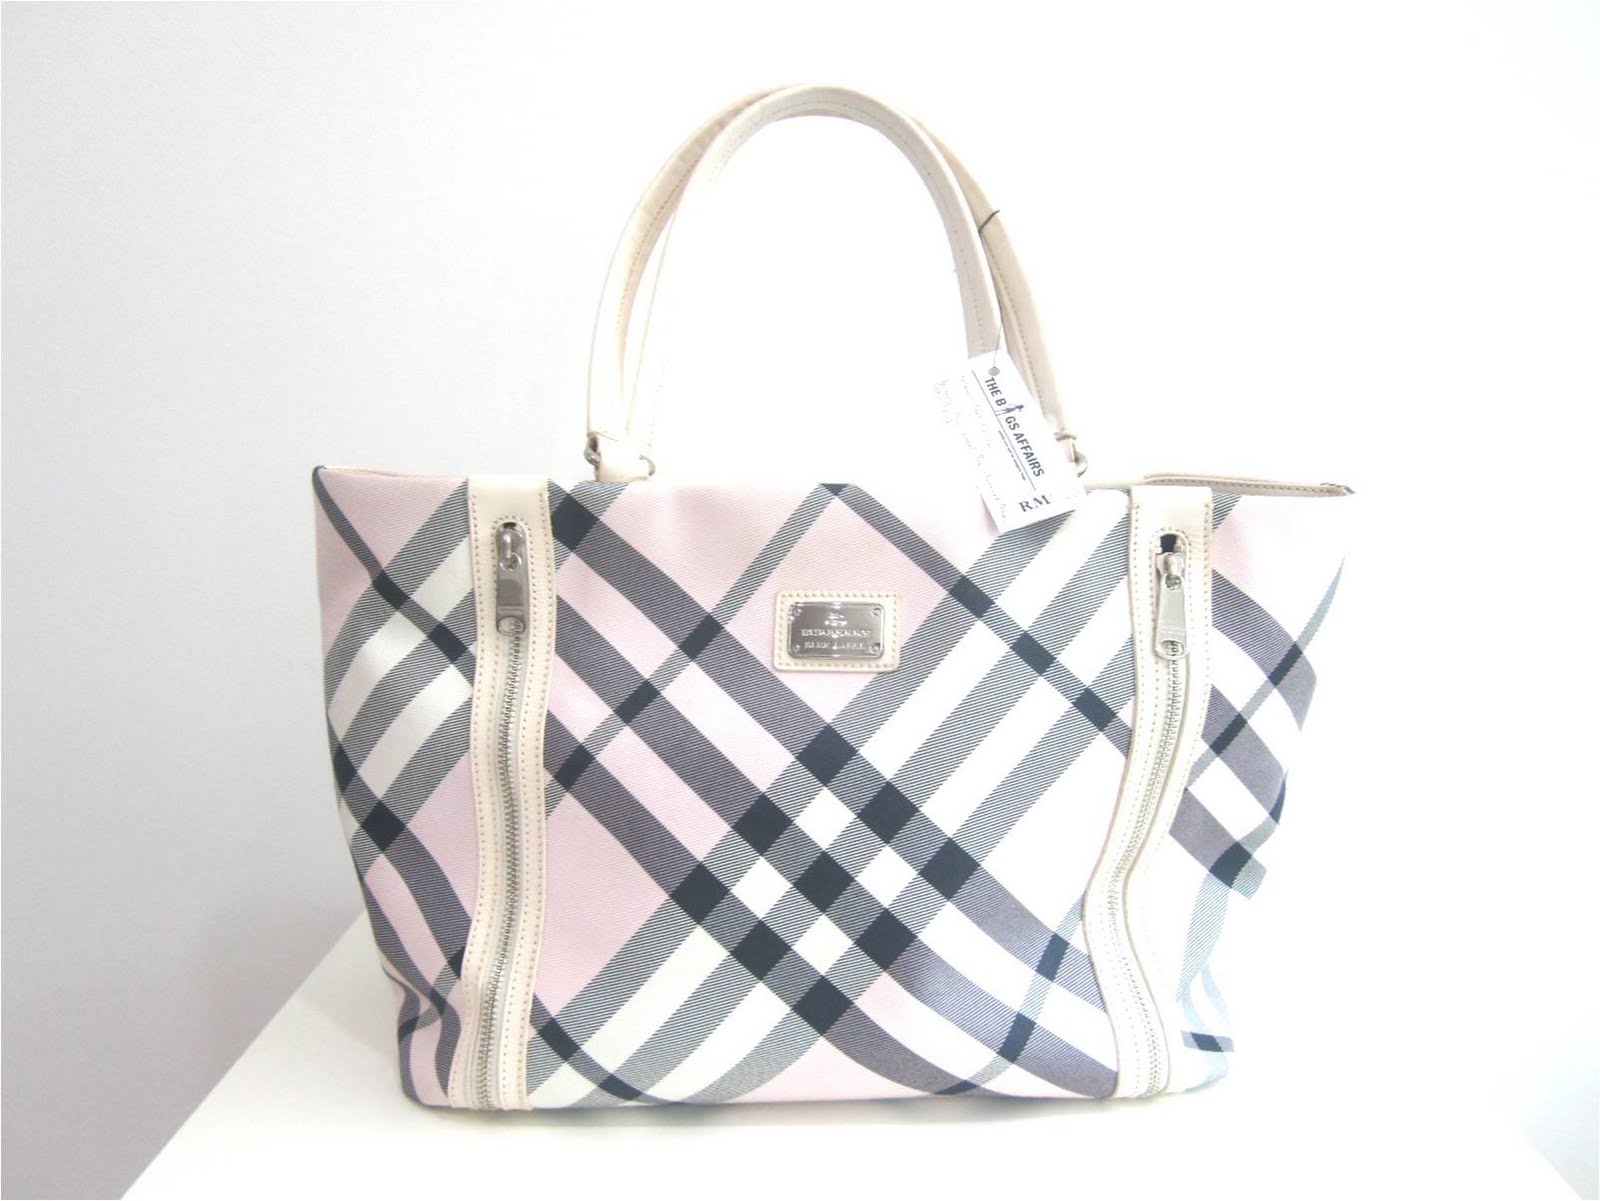 The Bags Affairs ~ Satisfy your lust for designer bags: BURBERRY BLUE LABEL PINK CHEKERED TOTE ...